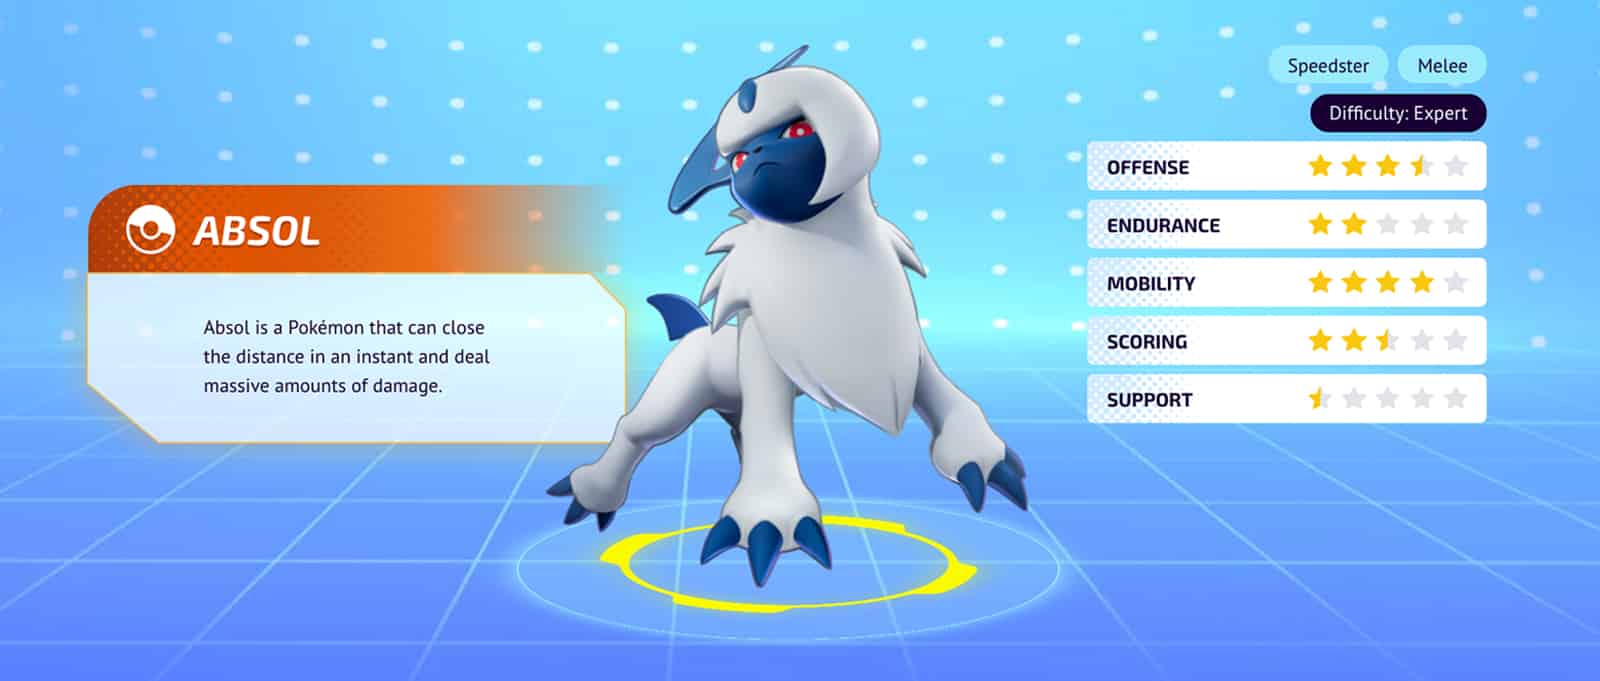 Android-er: Find the Best moveset of Pokémons